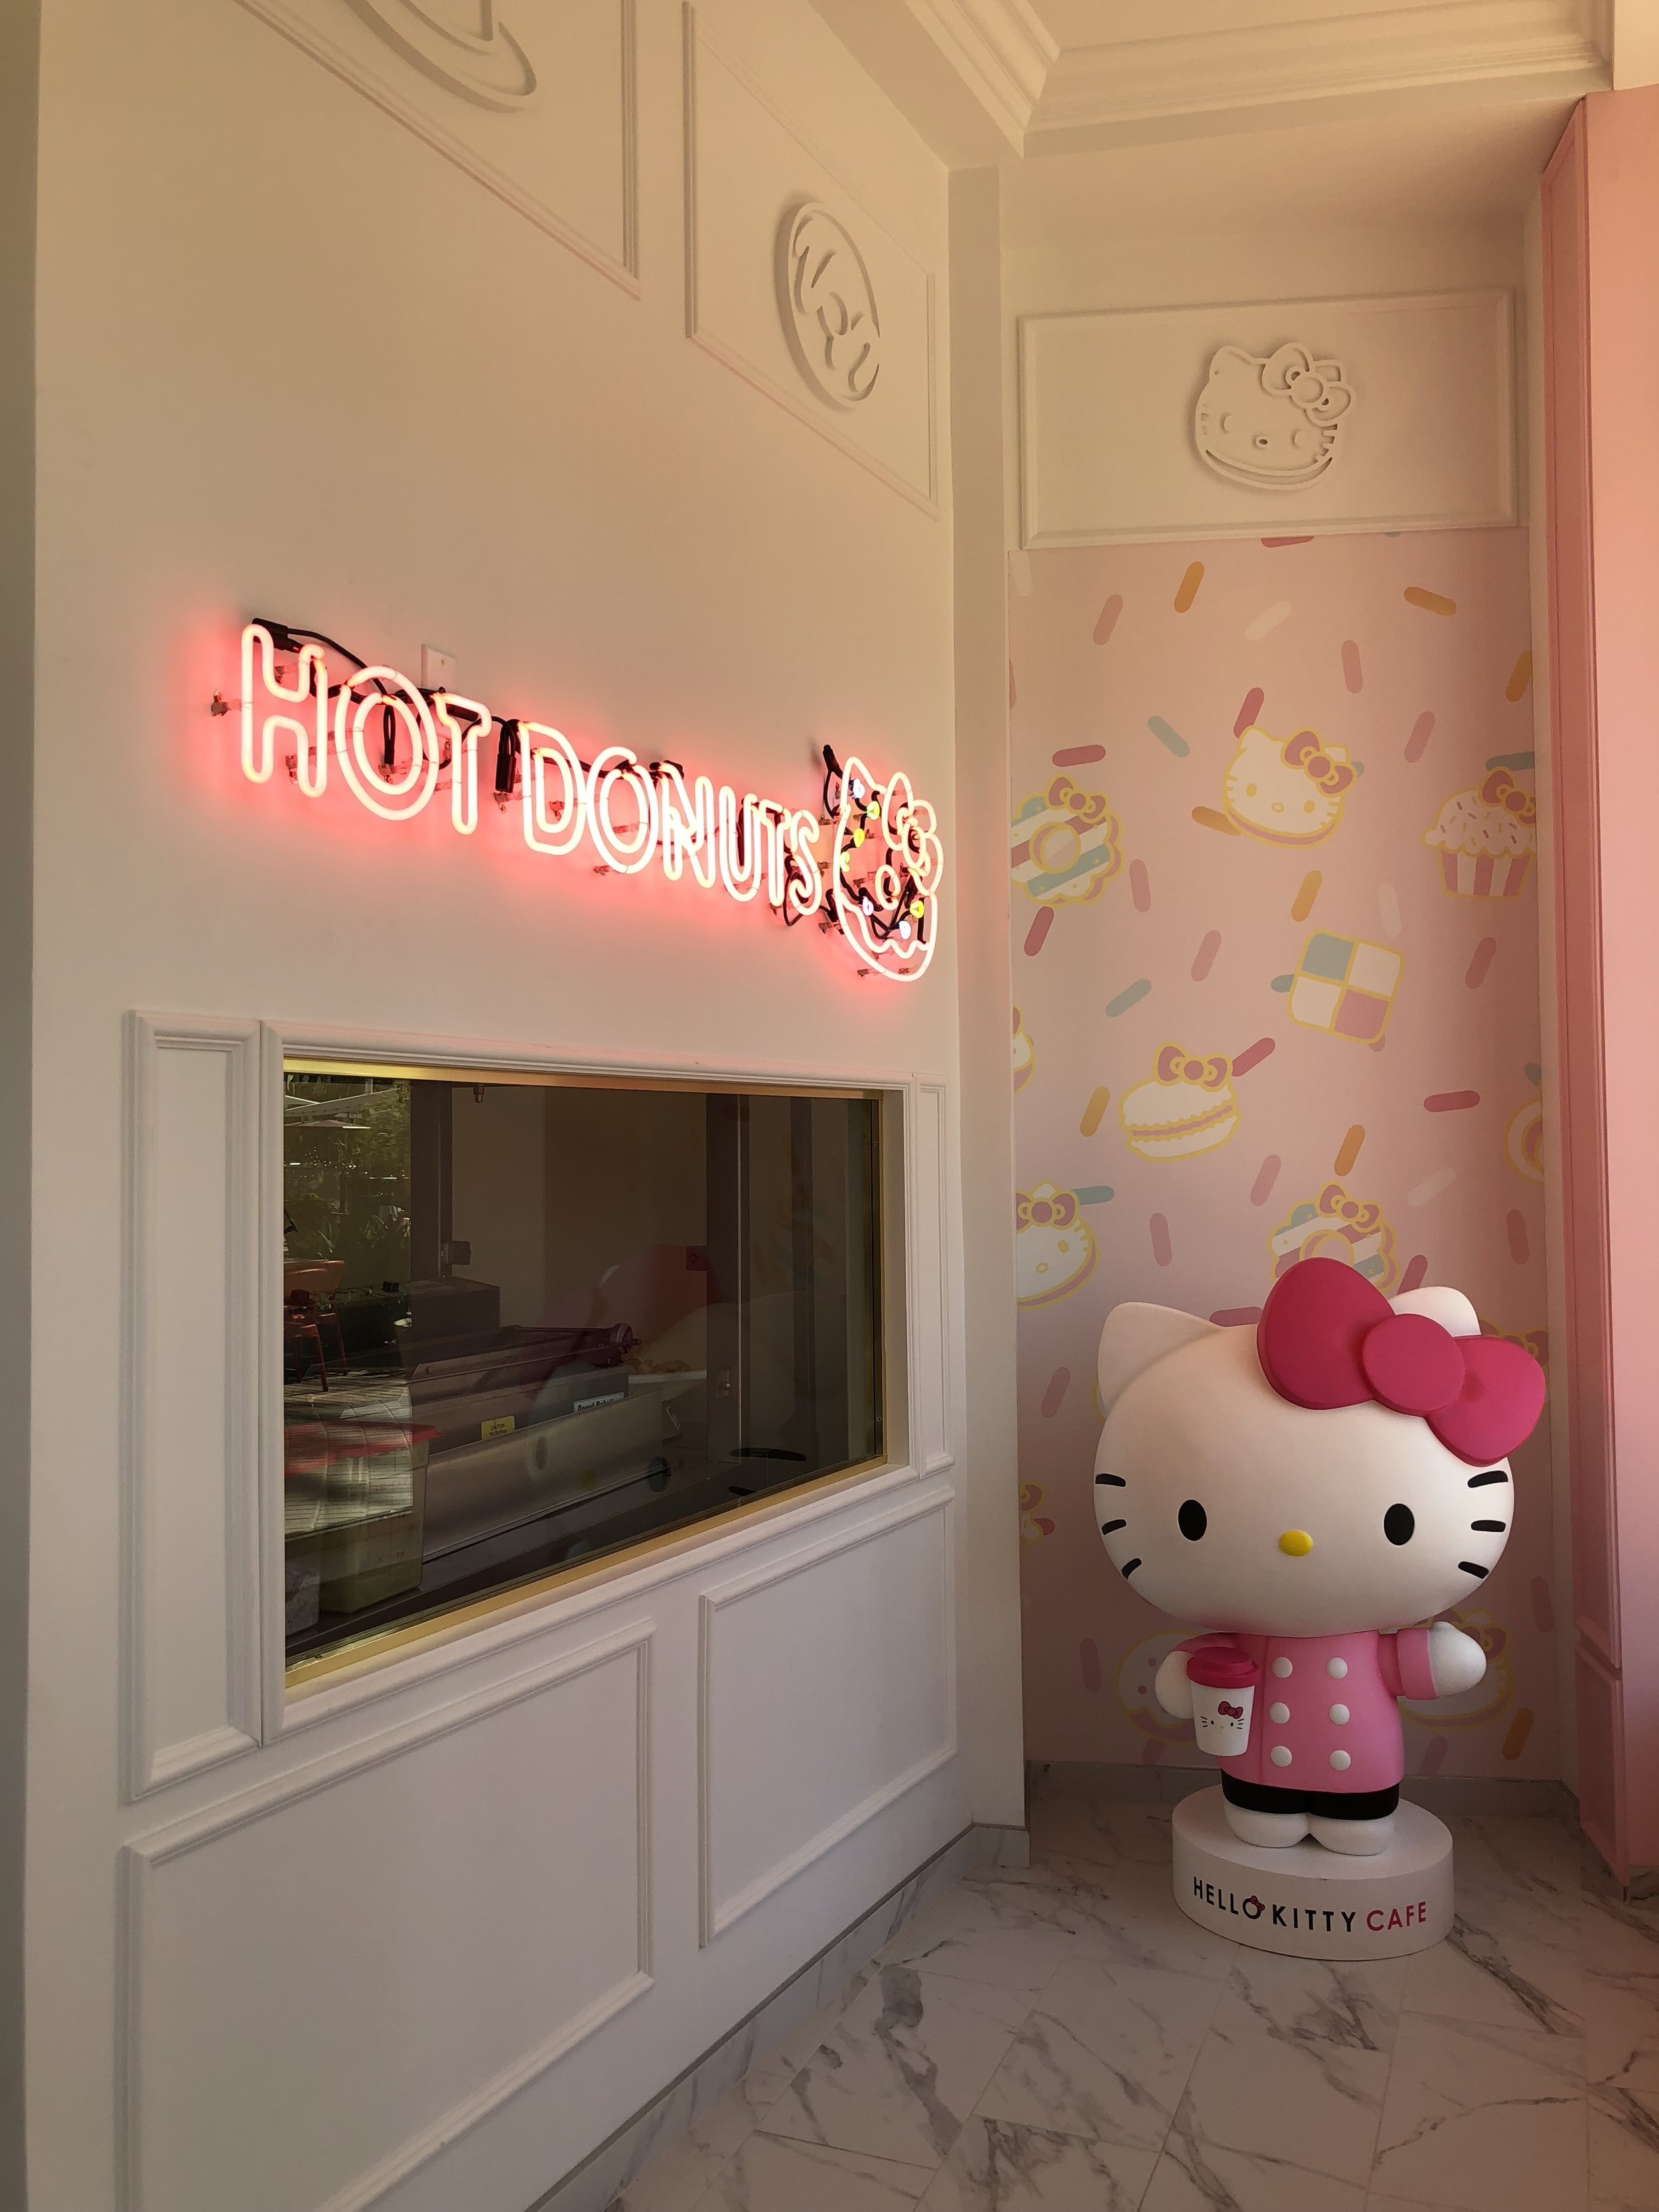 Been There, Do This: Hello Kitty Grand Cafe in Irvine, California